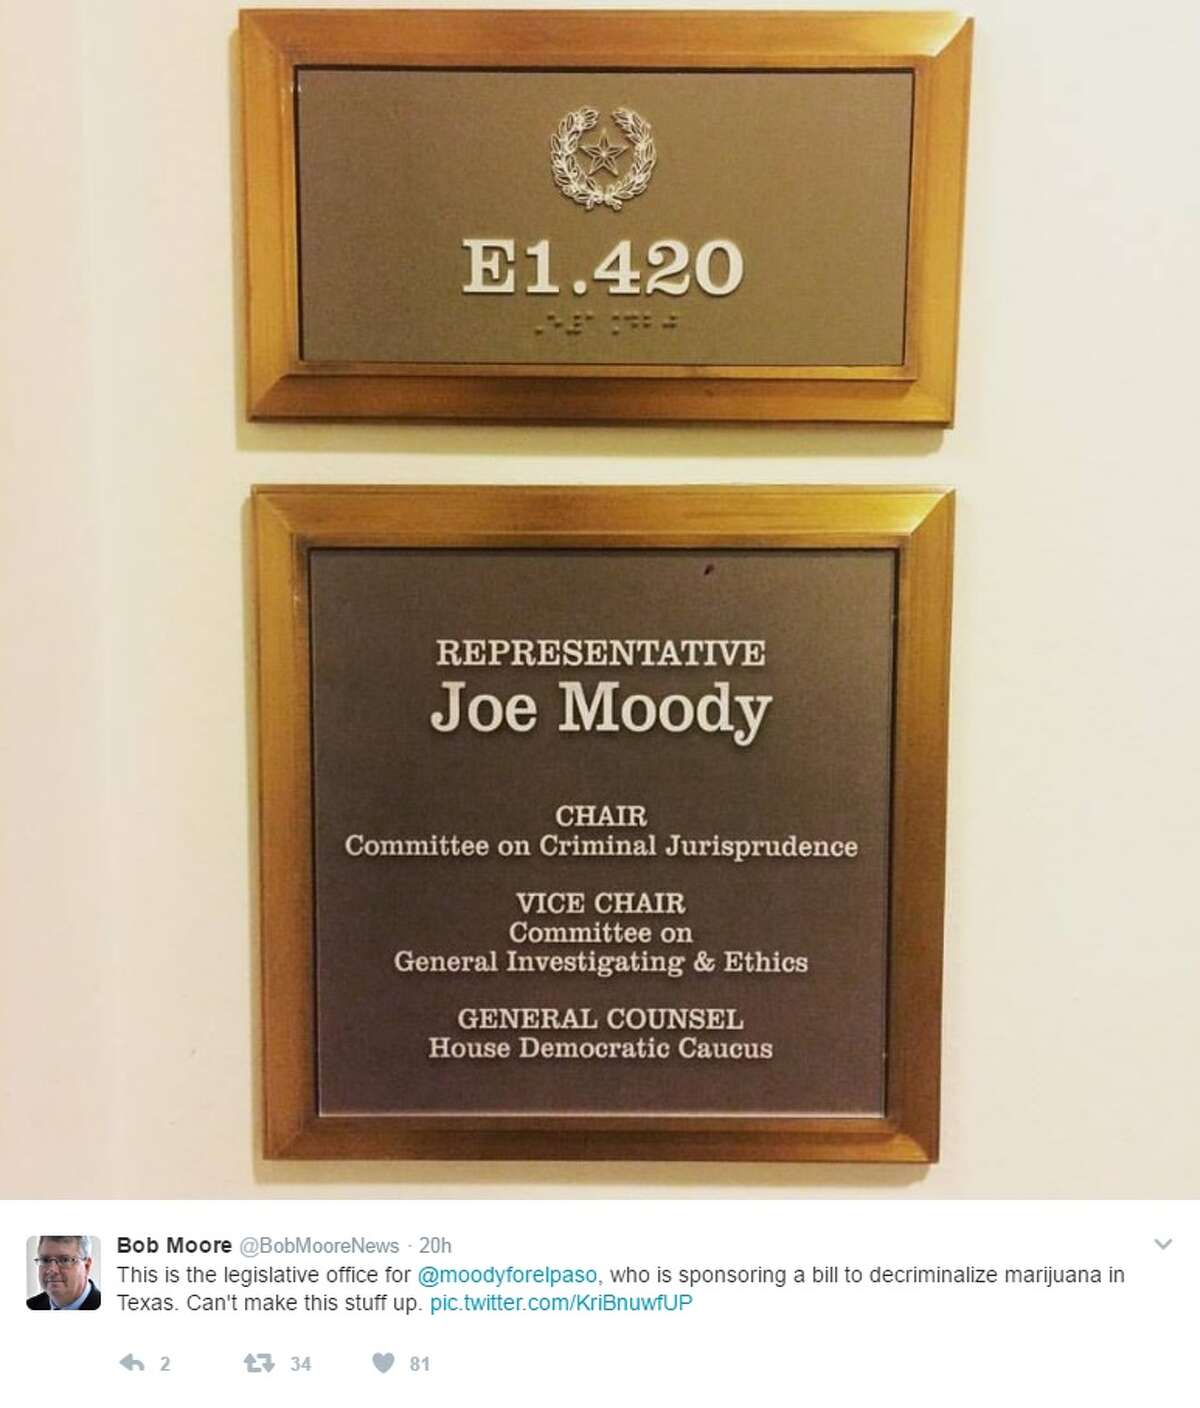 @BobMooreNews: "This is the legislative office for @moodyforelpaso, who is sponsoring a bill to decriminalize marijuana in Texas. Can't make this stuff up."